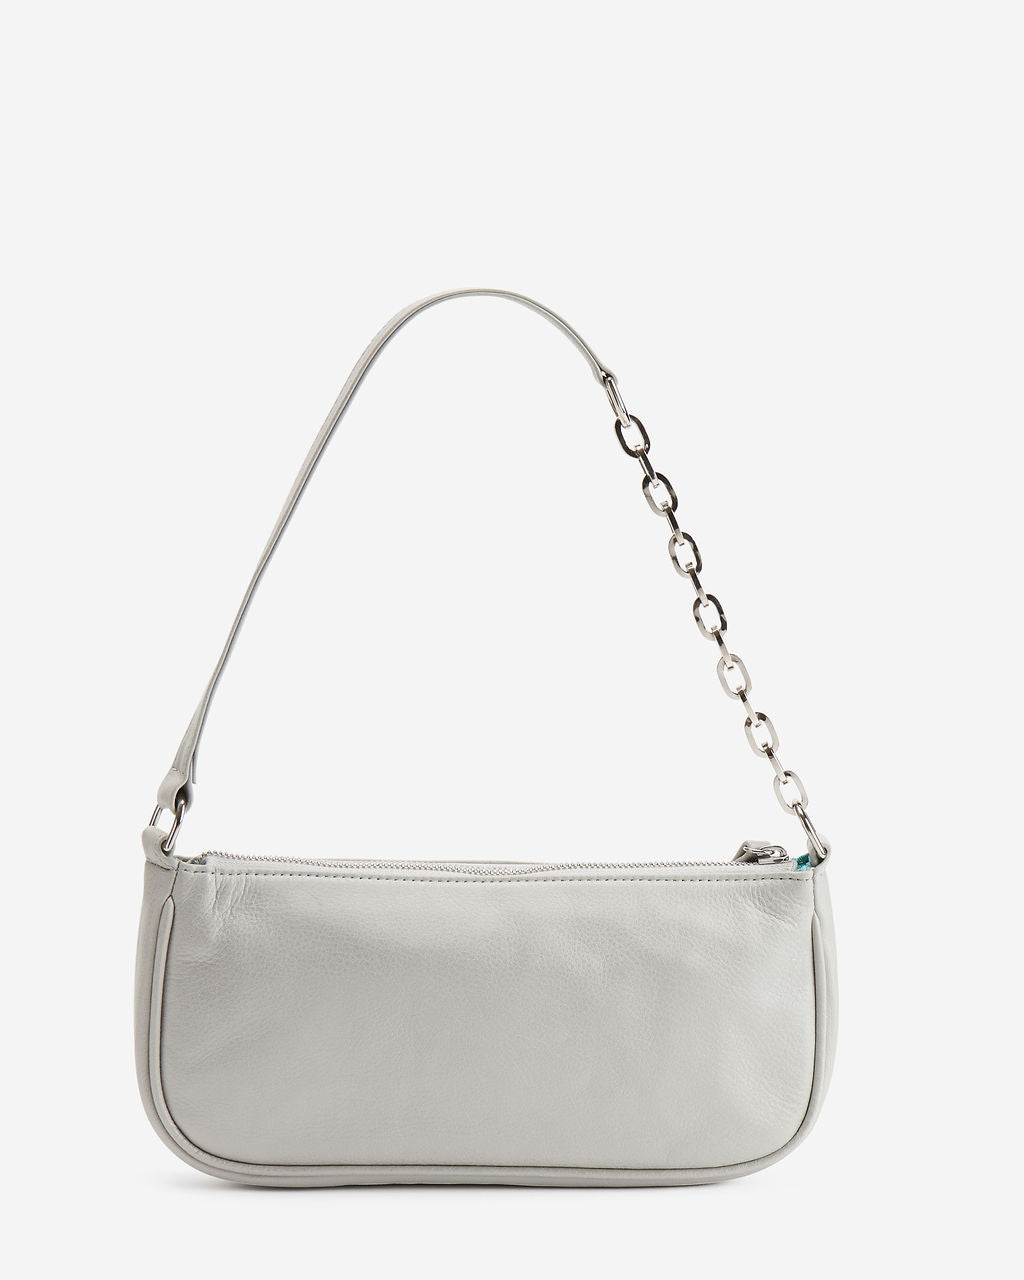 Lucy Bag - Silver  Joey James, The Label   